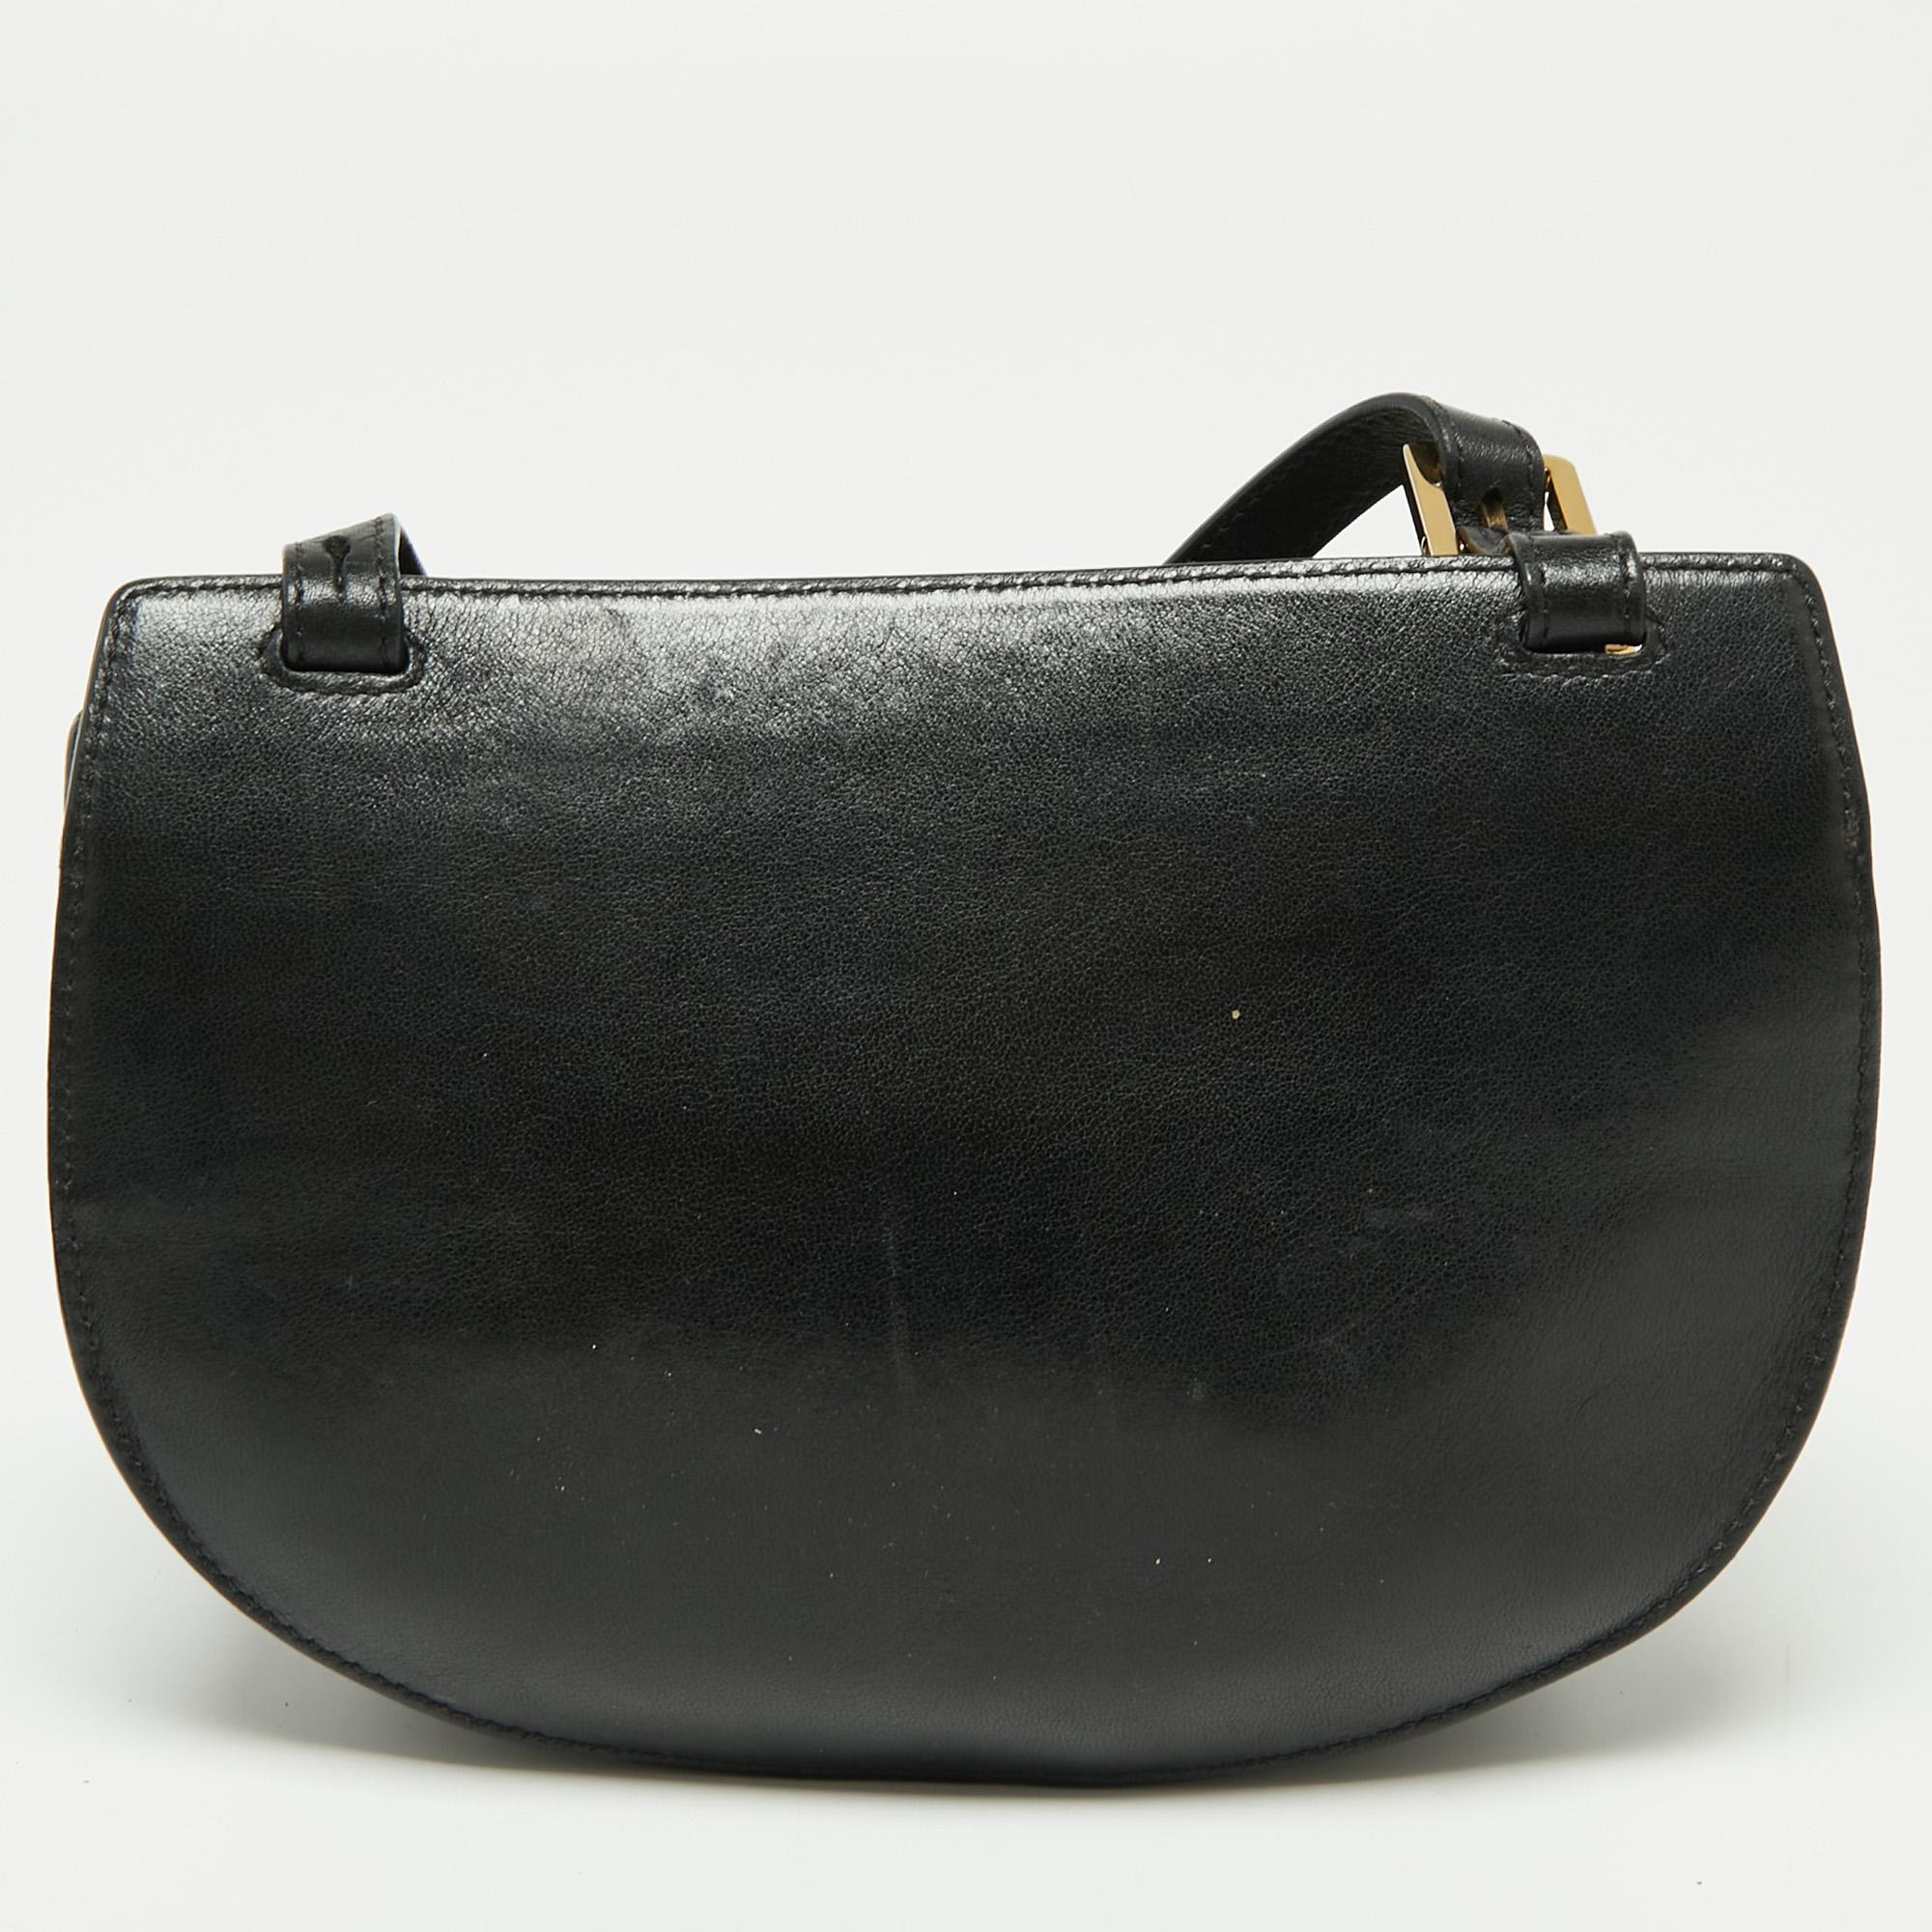 Characterized by a double flap closure, this crossbody bag from the house of Chloe is a chic way to carry your small everyday essentials in style. Elegantly crafted from lush leather, this black bag adds an exquisite look to your casual attire and